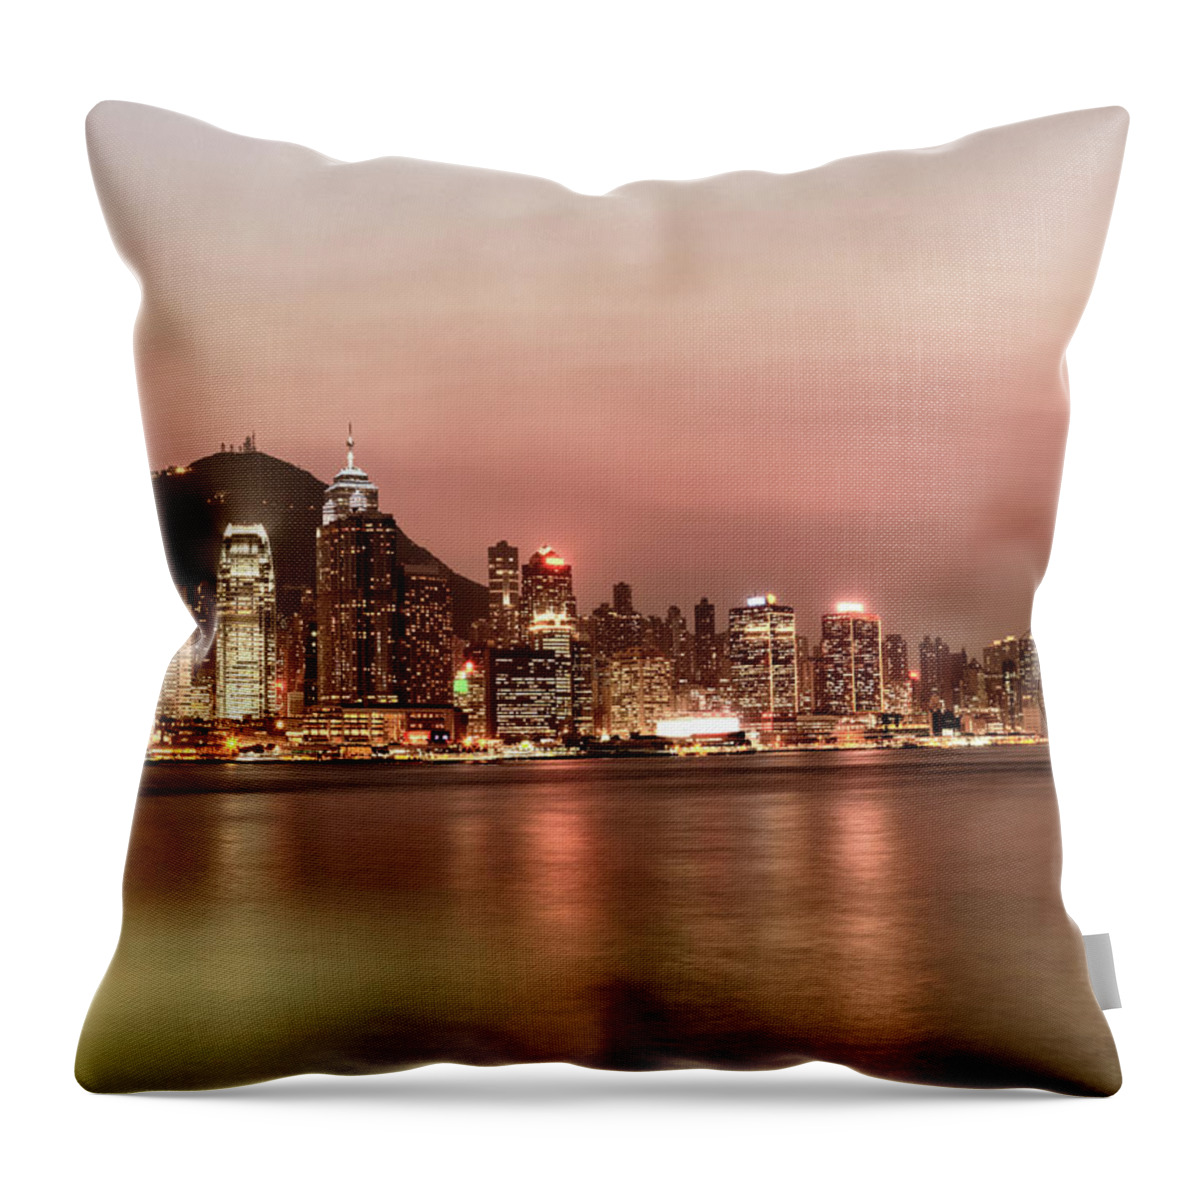 Chinese Culture Throw Pillow featuring the photograph Hong Kong At Sunset #2 by Laoshi